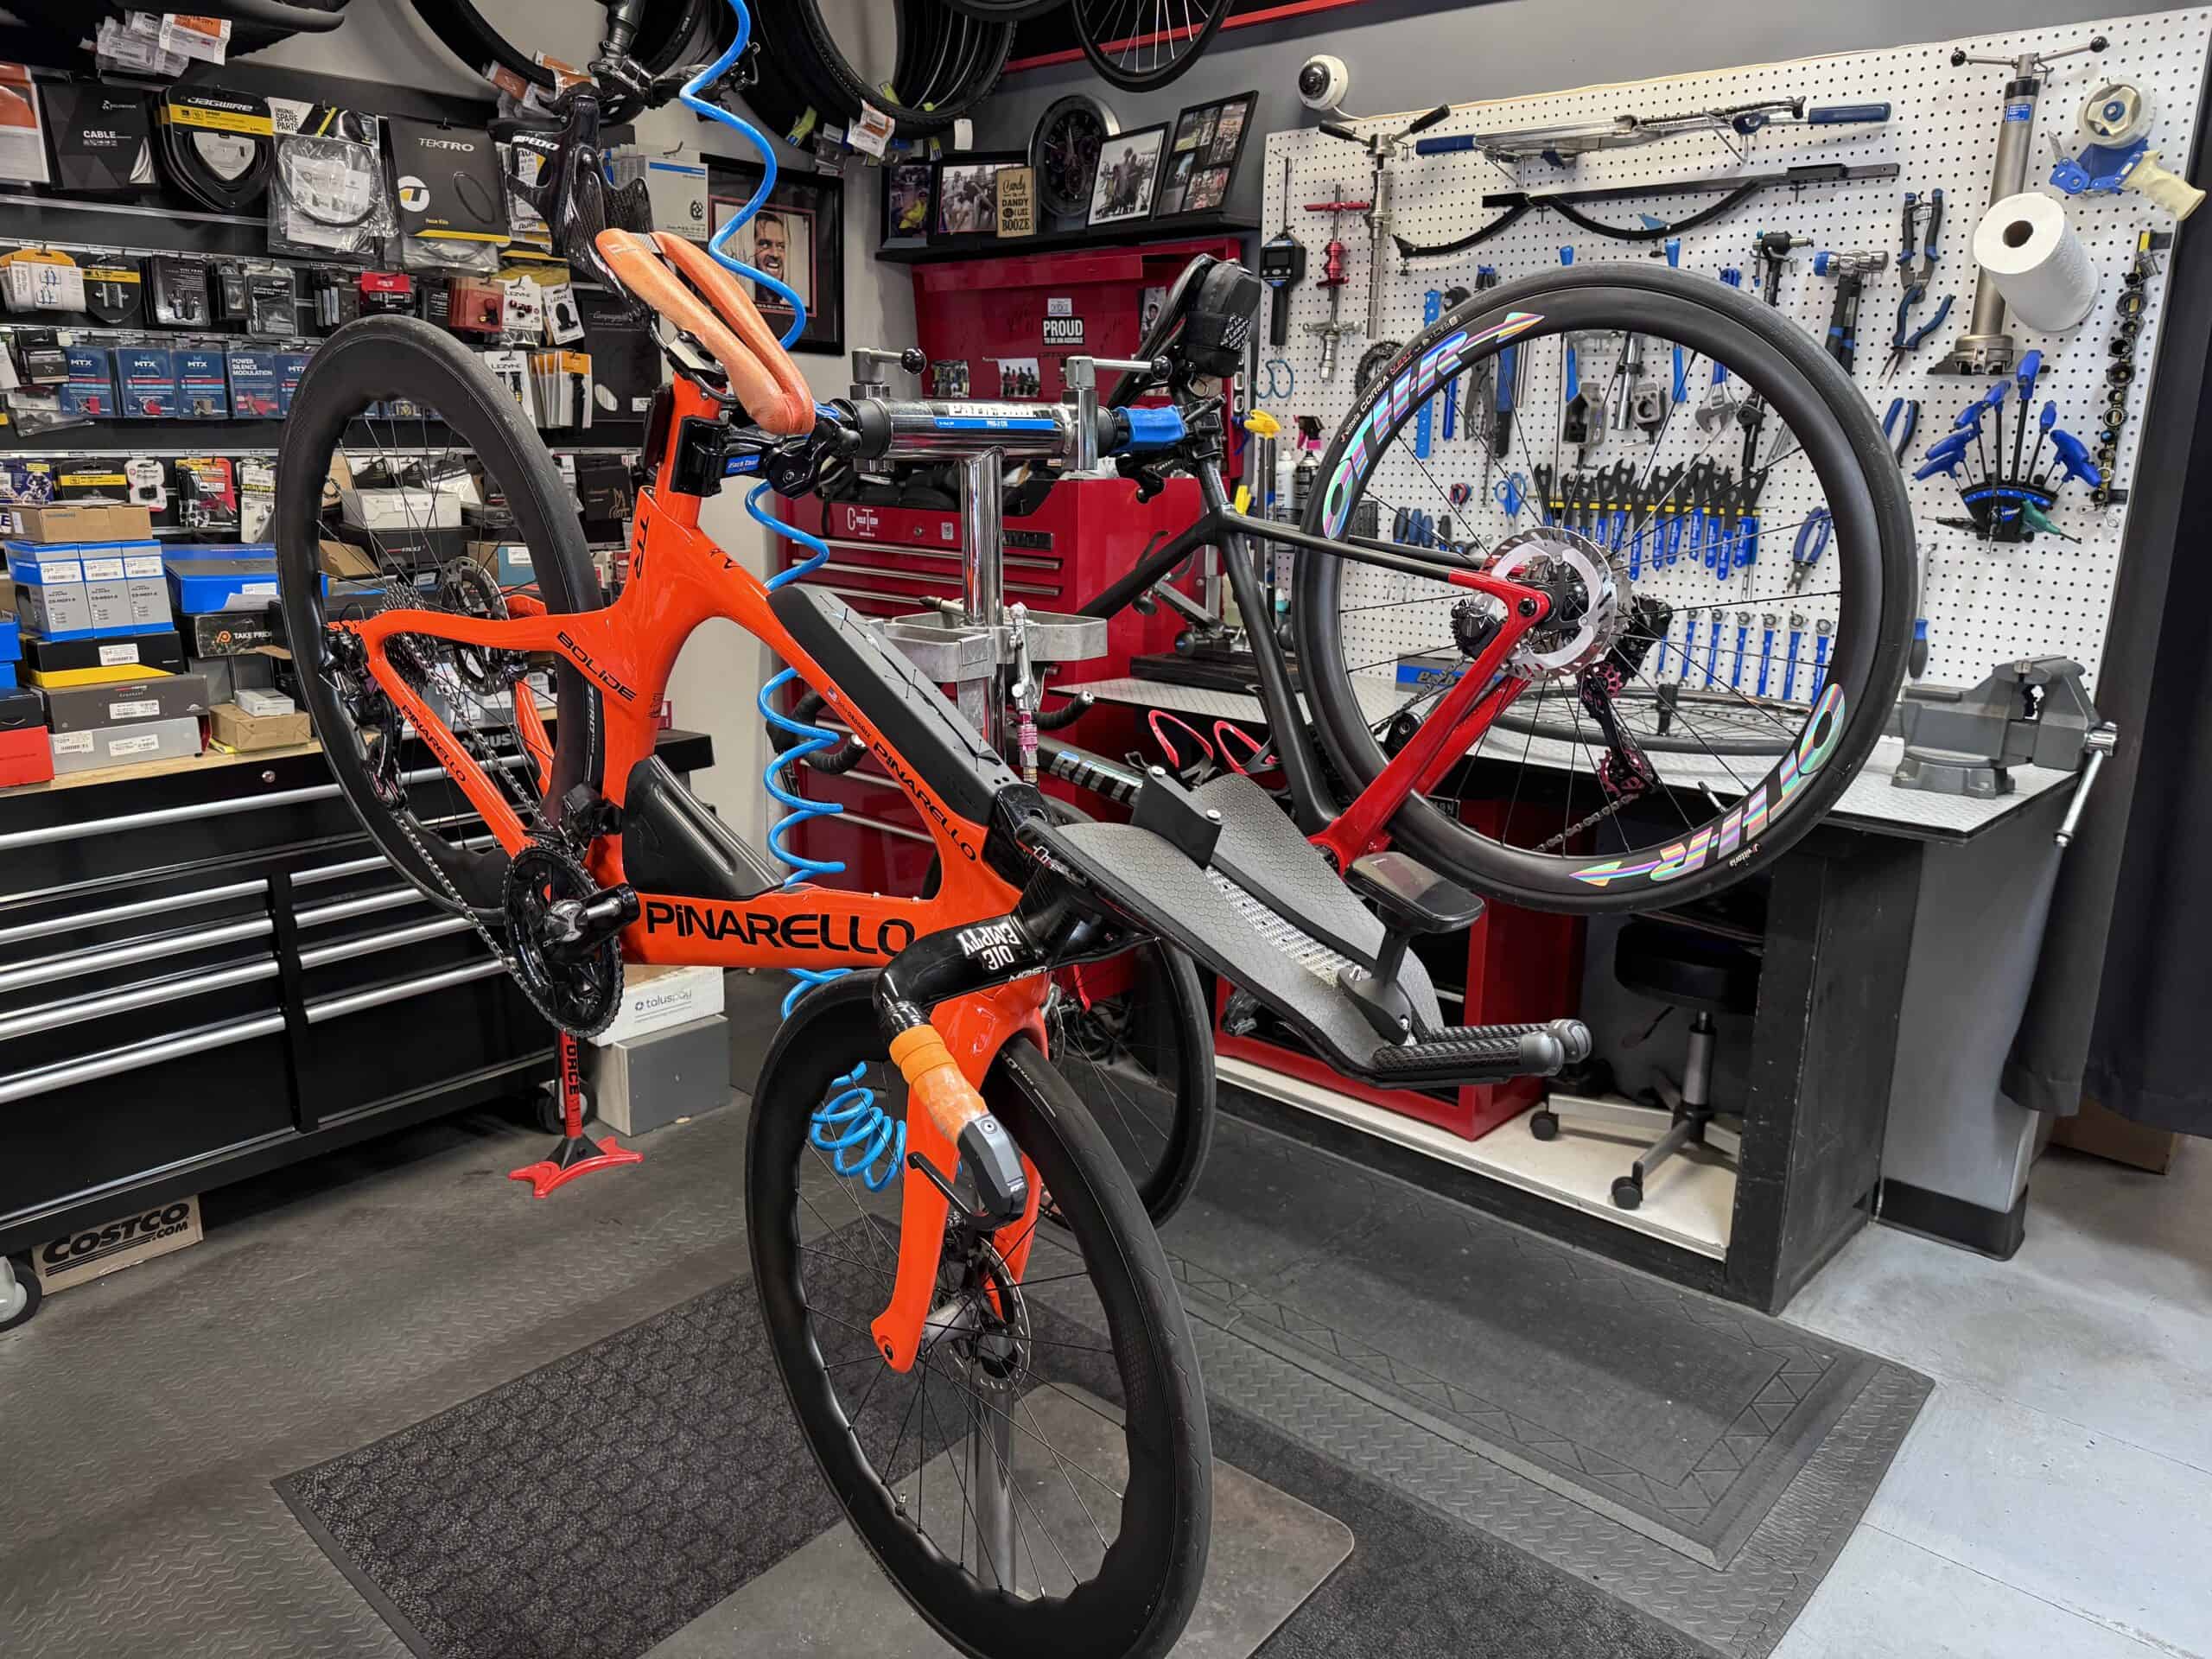 Image of bikes being worked on.